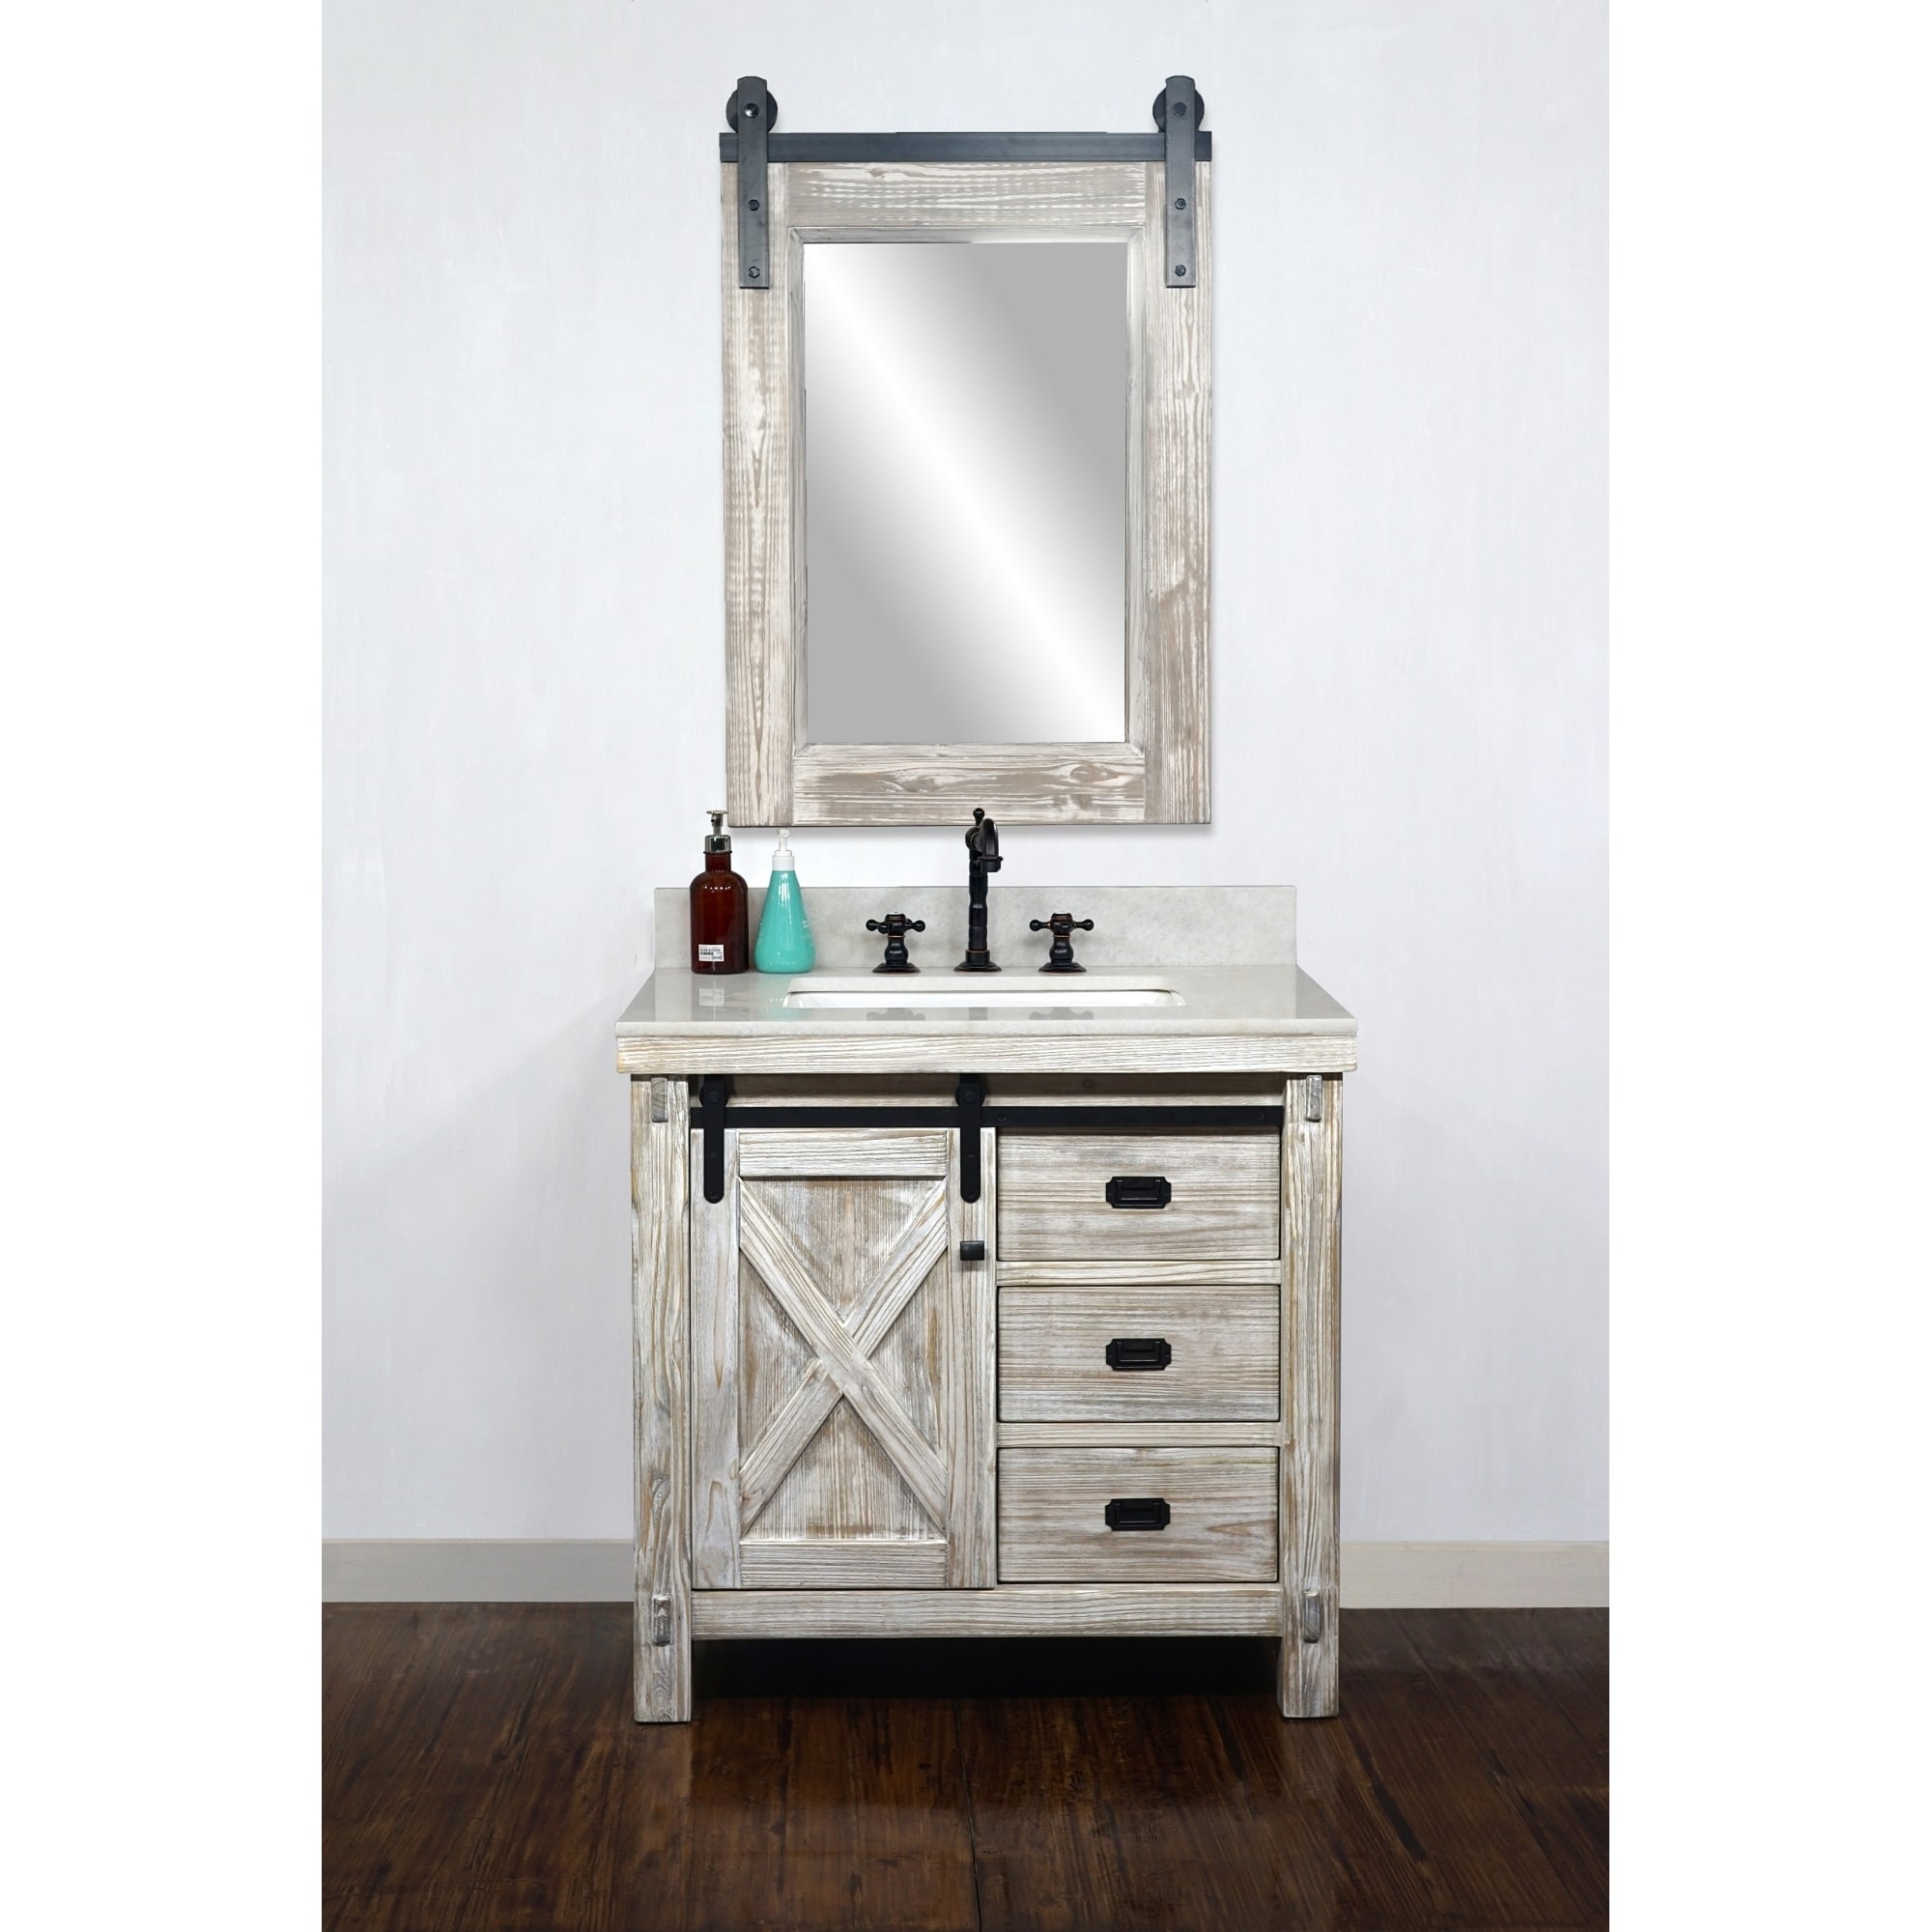 37 Rustic Solid Fir Barn Door Style Single Sink White Wash Finish Vanity With Marble Or Granite Top No Faucet Overstock 29882552